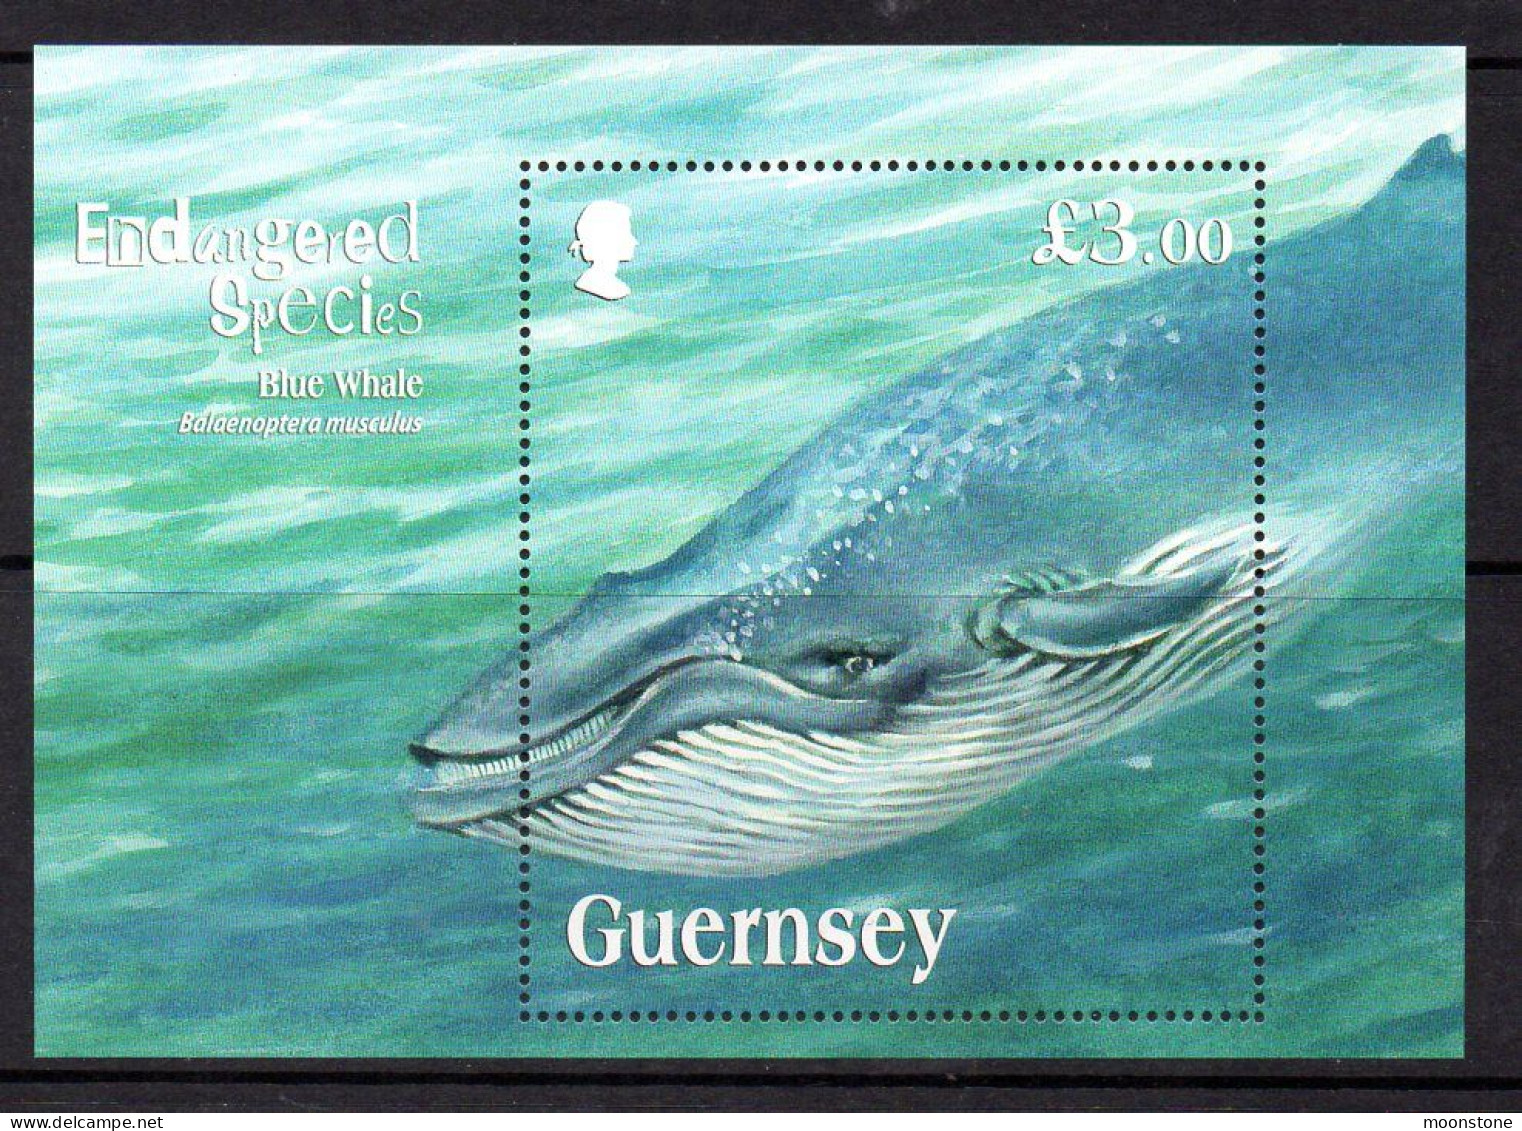 Guernsey 2011 Endangered Species VII, Blue Whale MS, MNH, SG 1368 - Guernesey